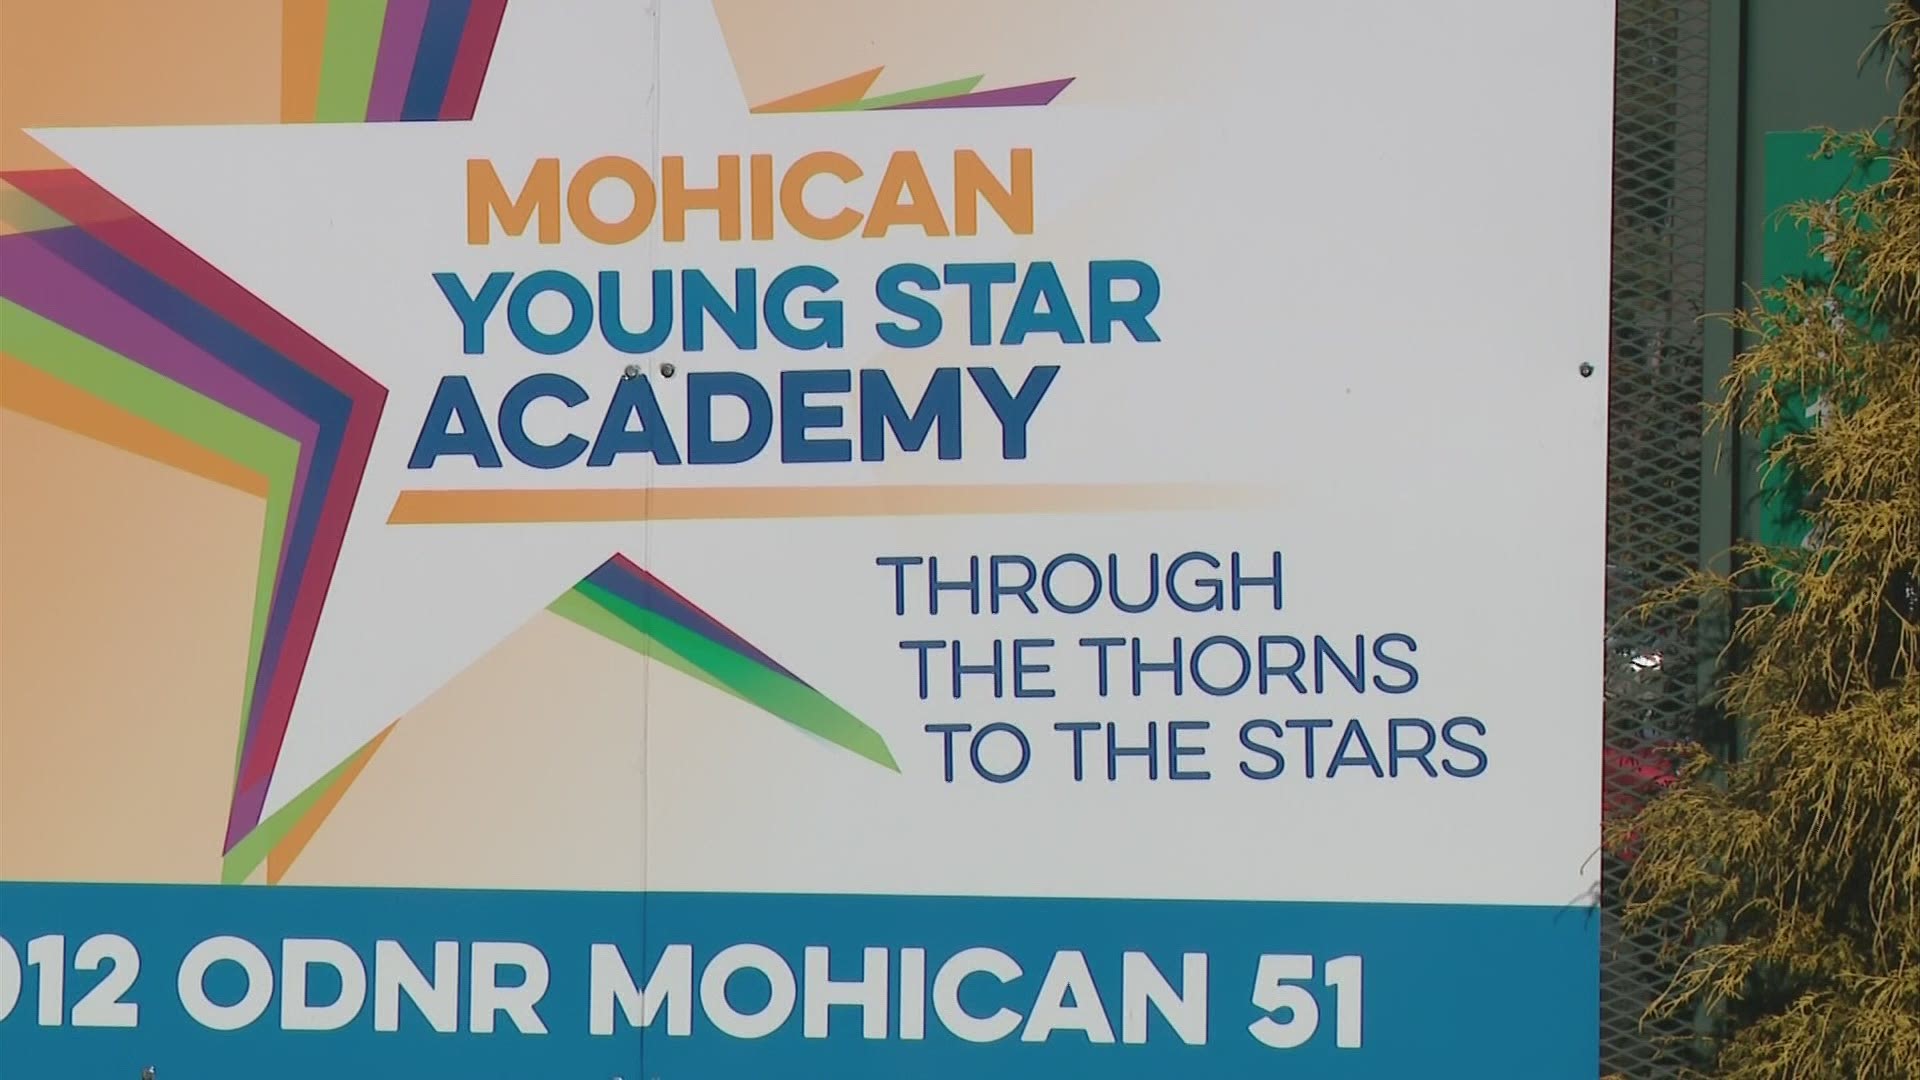 Ohio Attorney General Dave Yost's lawsuit against Mohican Young Star Academy was dismissed because the judge said the attorneys failed to prove their case.